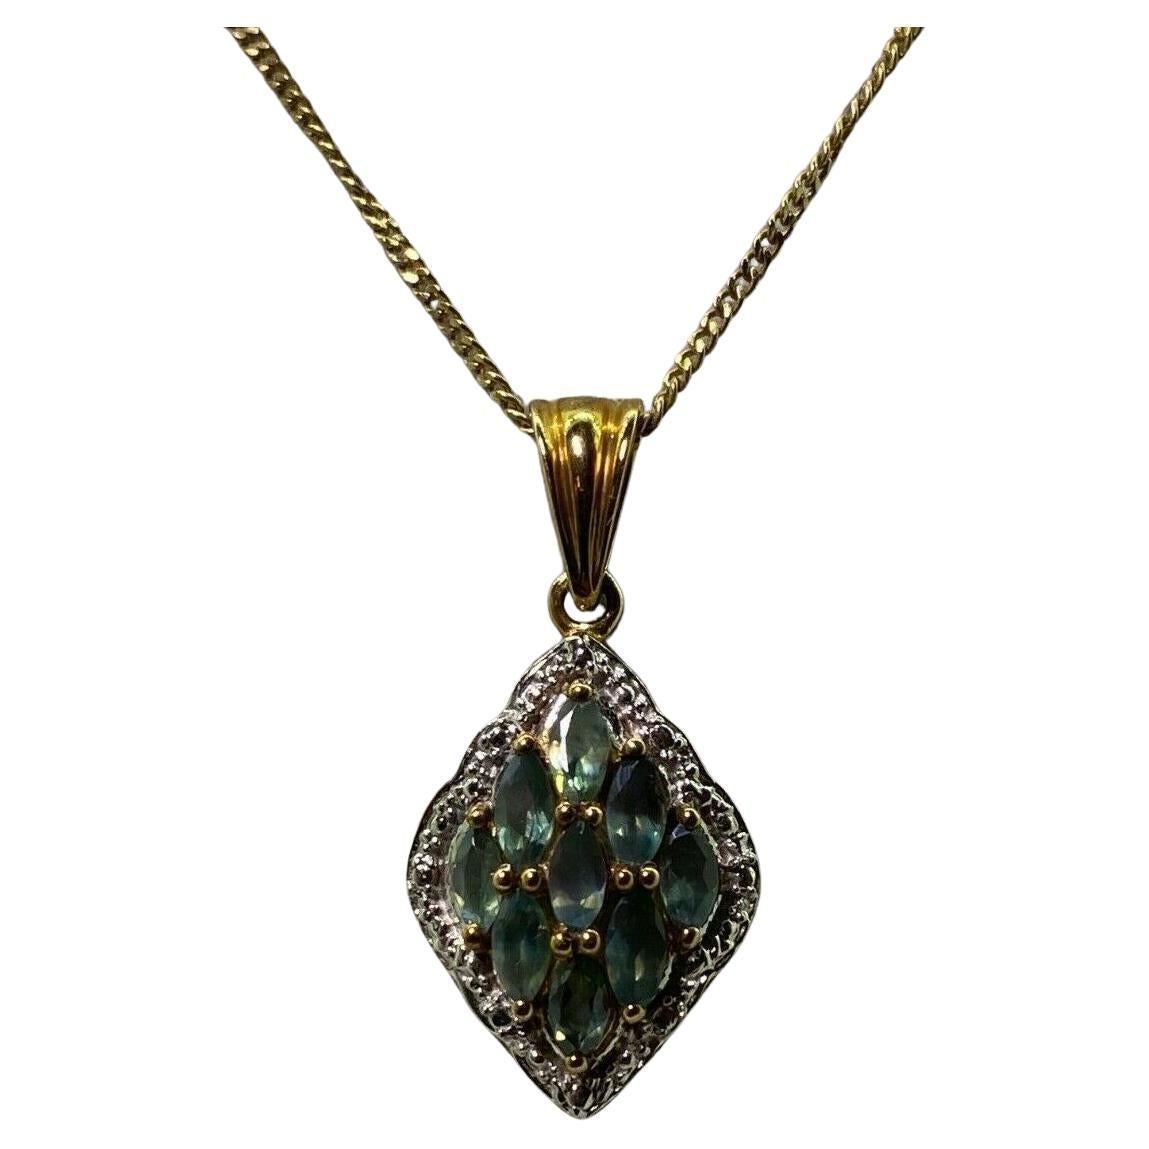 Set with 9 Oval Natural Greenish Blue Sapphires 
of 1.20ct in total approx.

within rosy gold claw setting 

within an illusion setting 
crafted in 9K White & Rose Gold 

Total item's weight: 3.3gr. 
Dimensions of the pendant: 30mm (including bail)